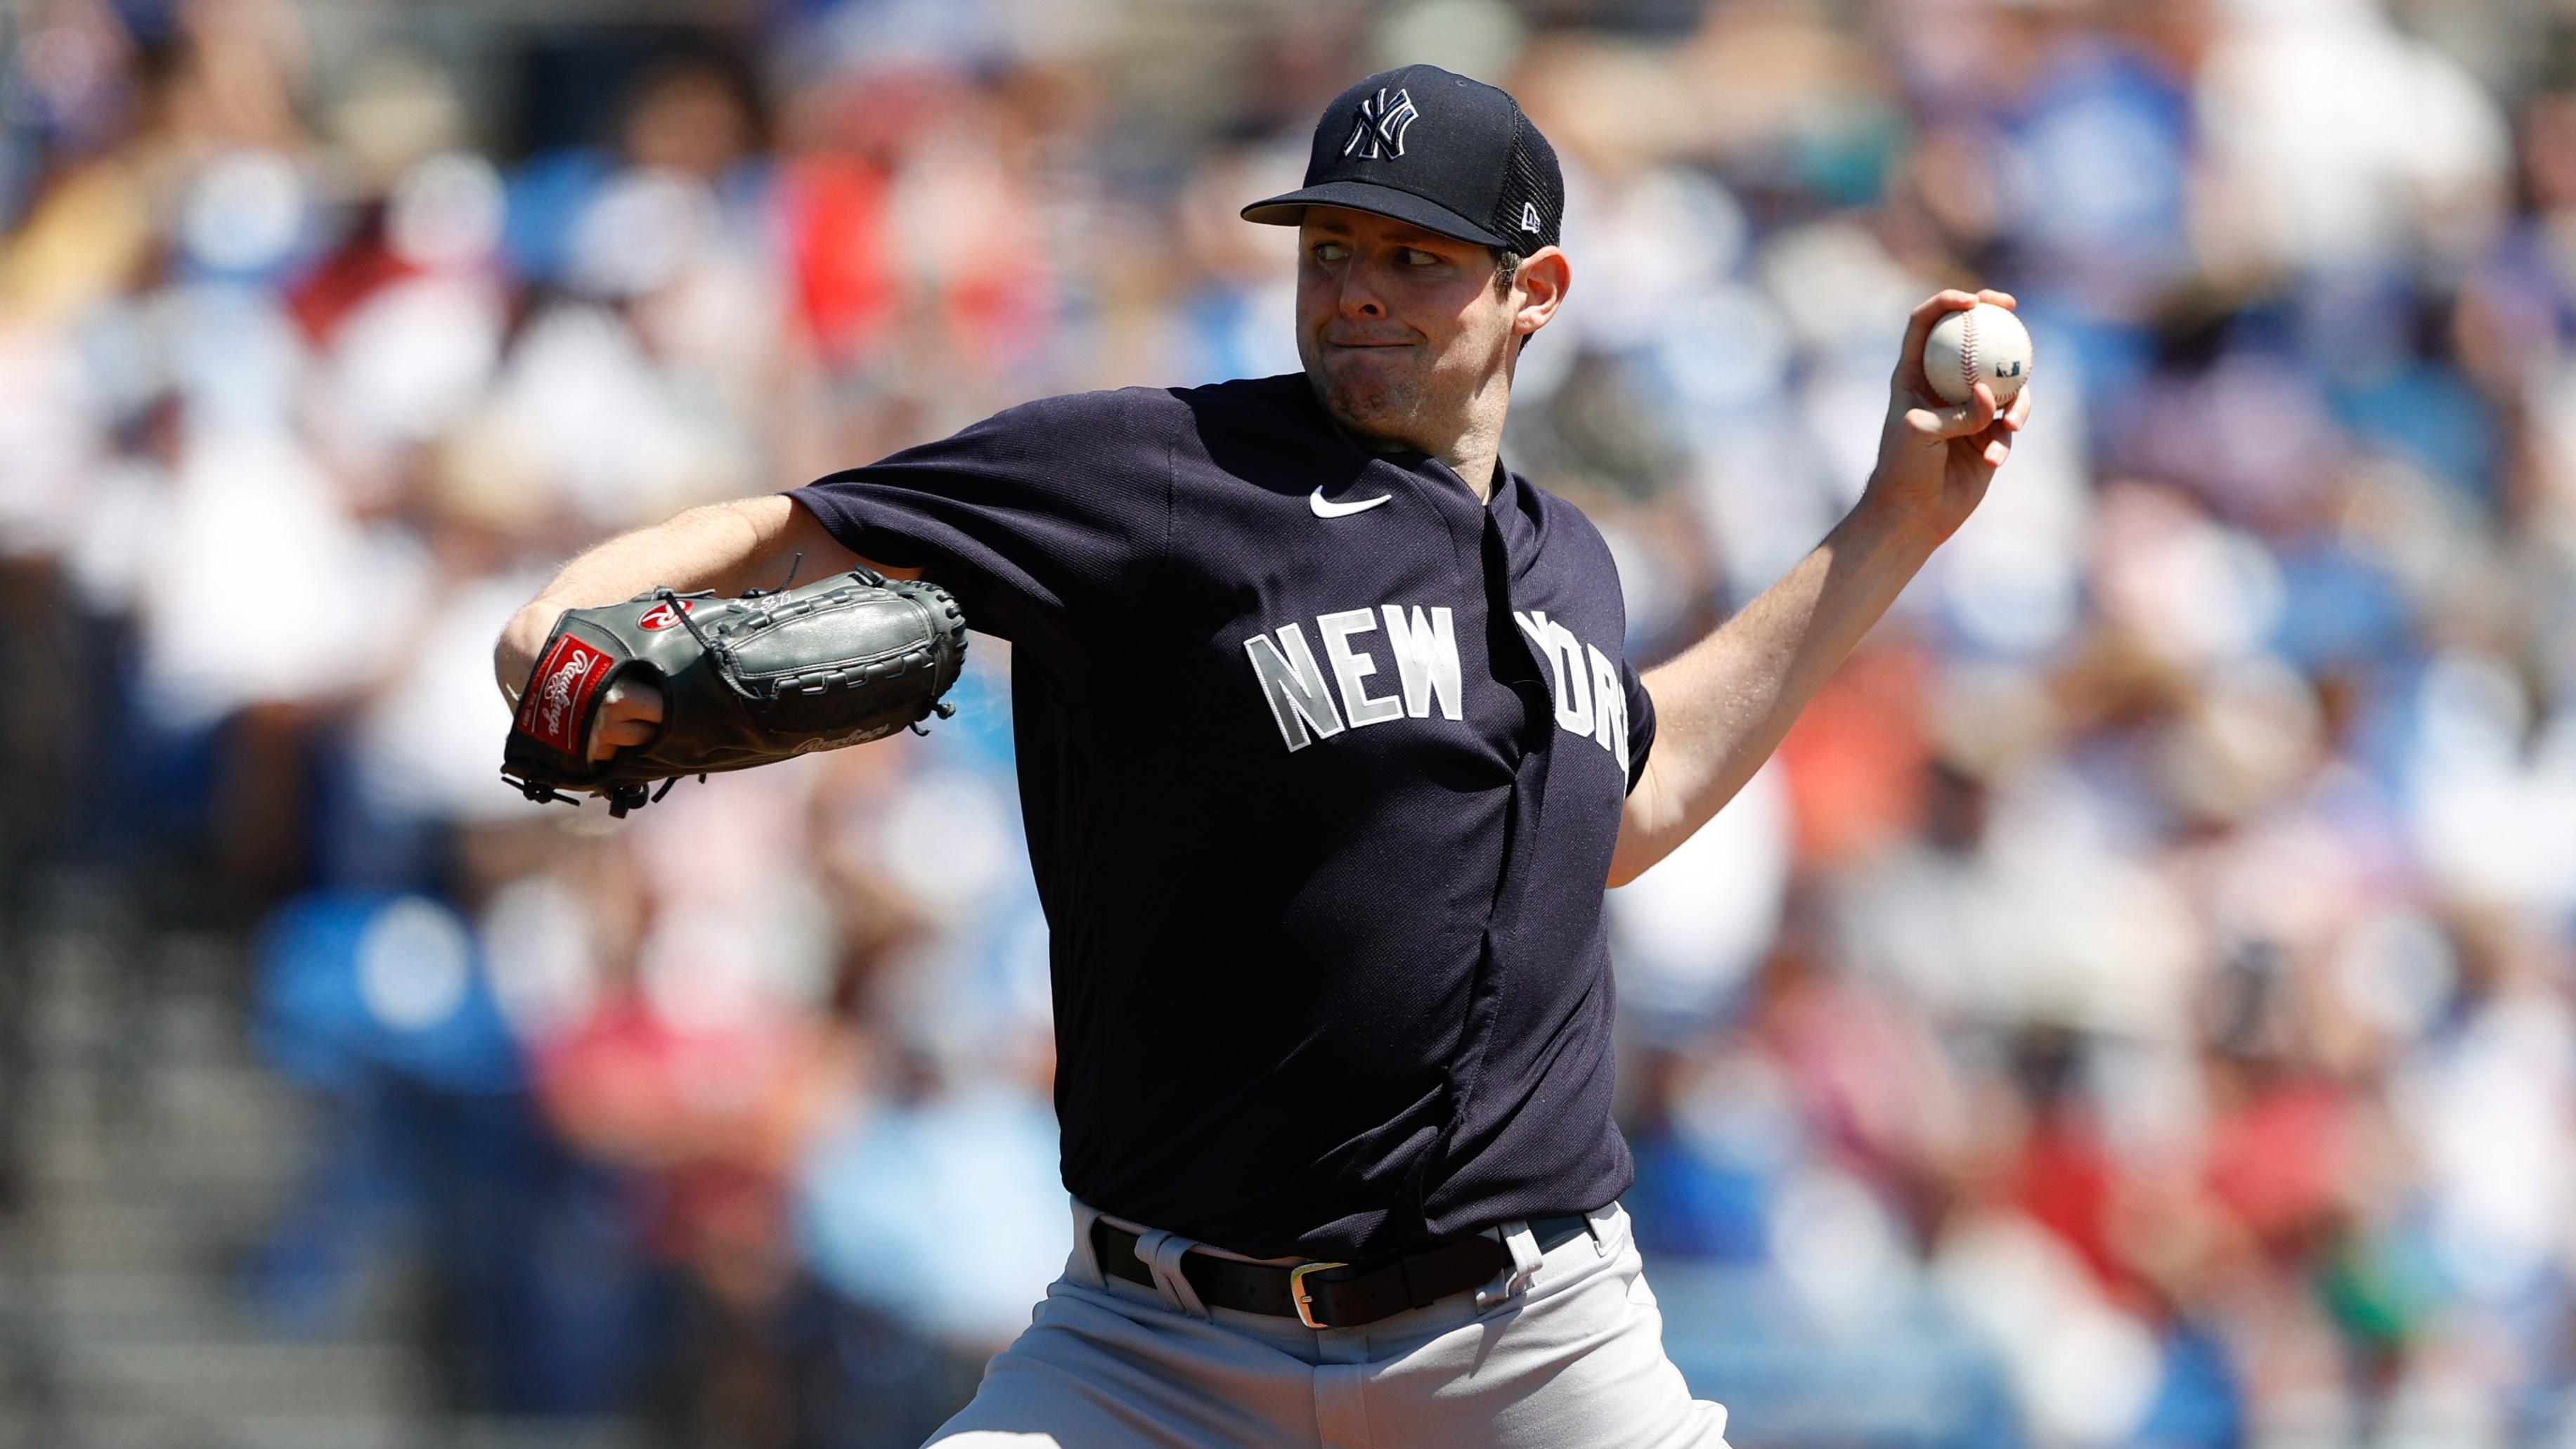 New York Yankees starting pitcher Jordan Montgomery (47) throws a pitch in the first inning against the Toronto Blue Jays during spring training at TD Ballpark. / Nathan Ray Seebeck-USA TODAY Sports